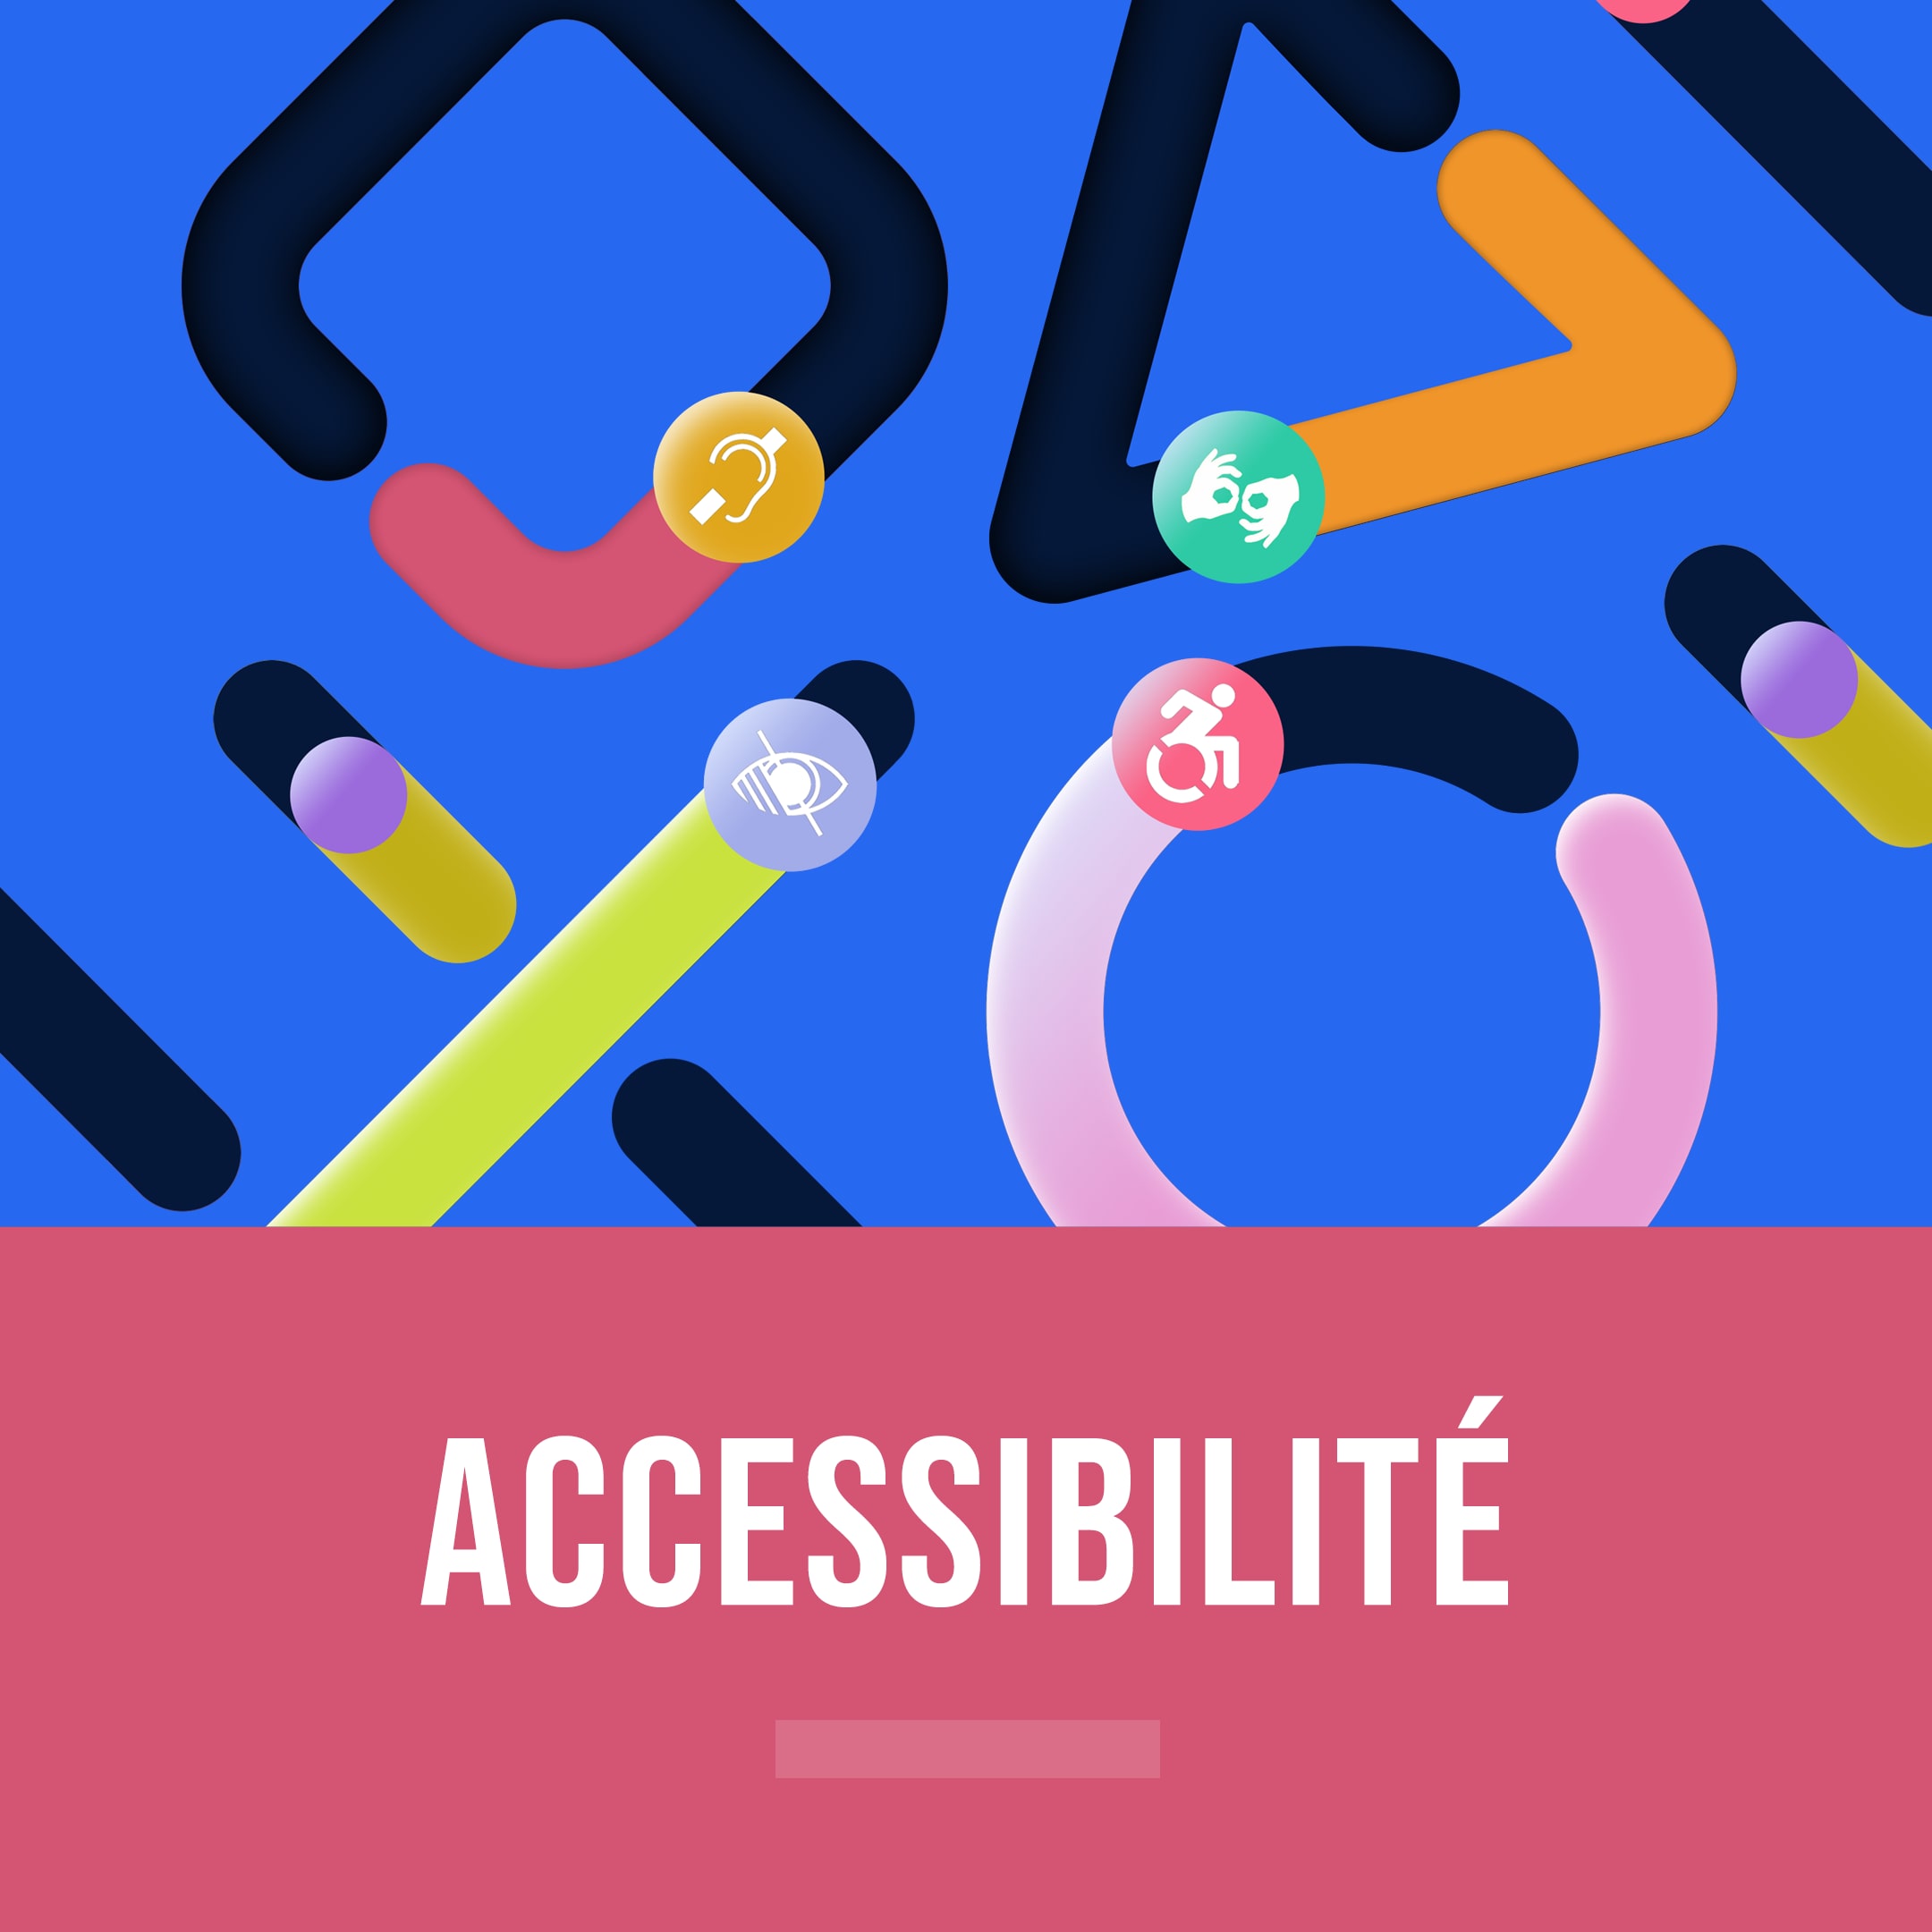 [EDITORIAL] Accessibility Color Tab Oct 21 S26